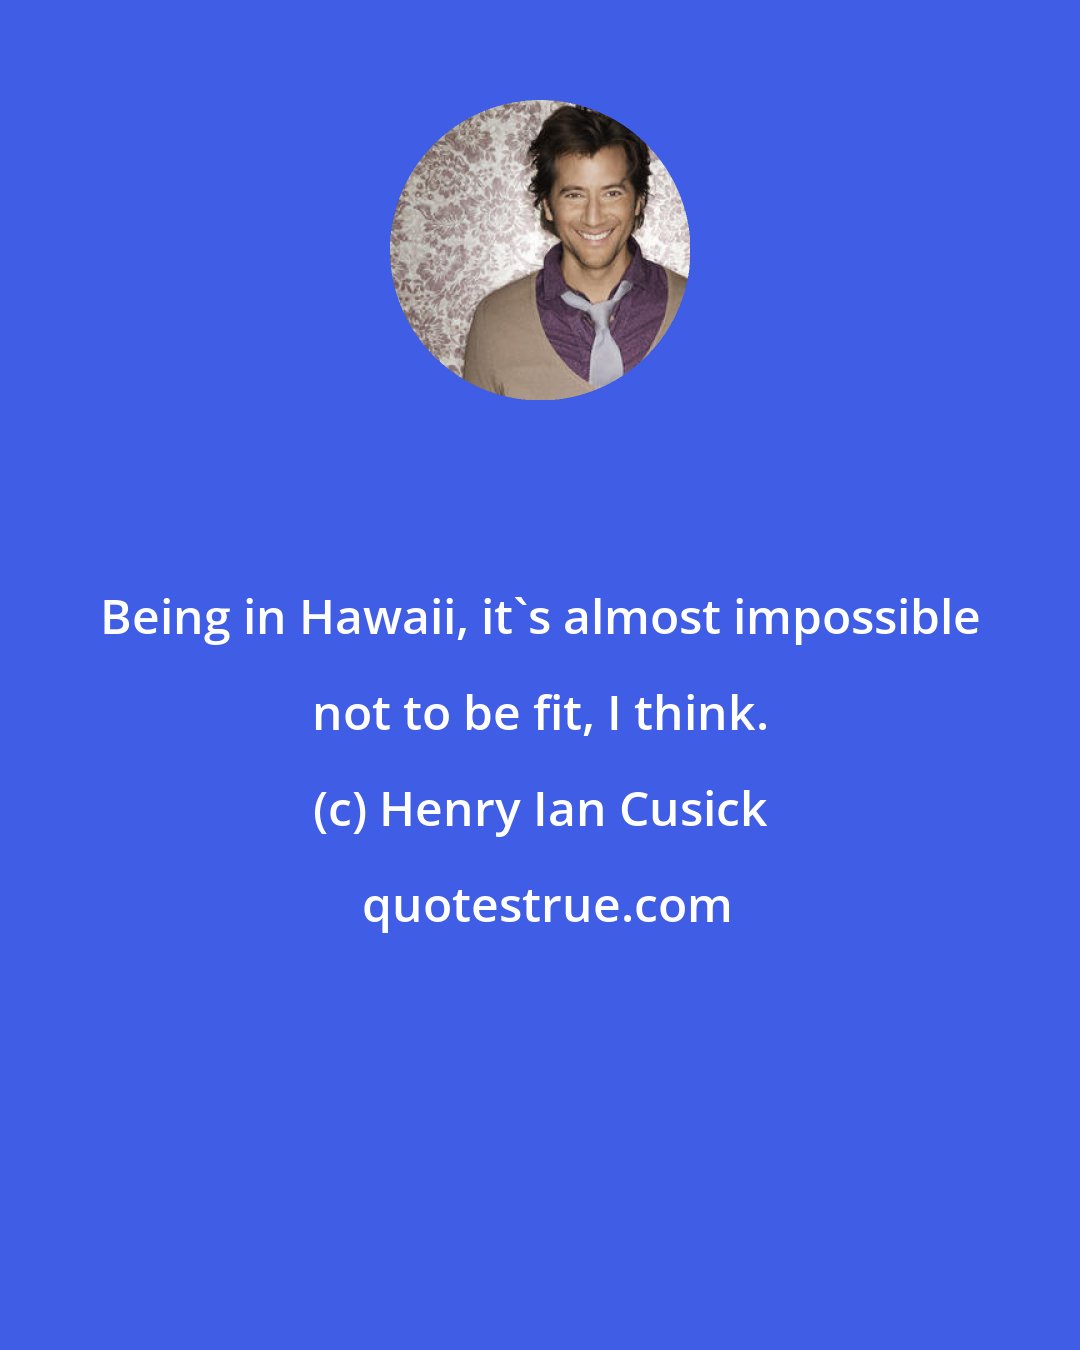 Henry Ian Cusick: Being in Hawaii, it's almost impossible not to be fit, I think.